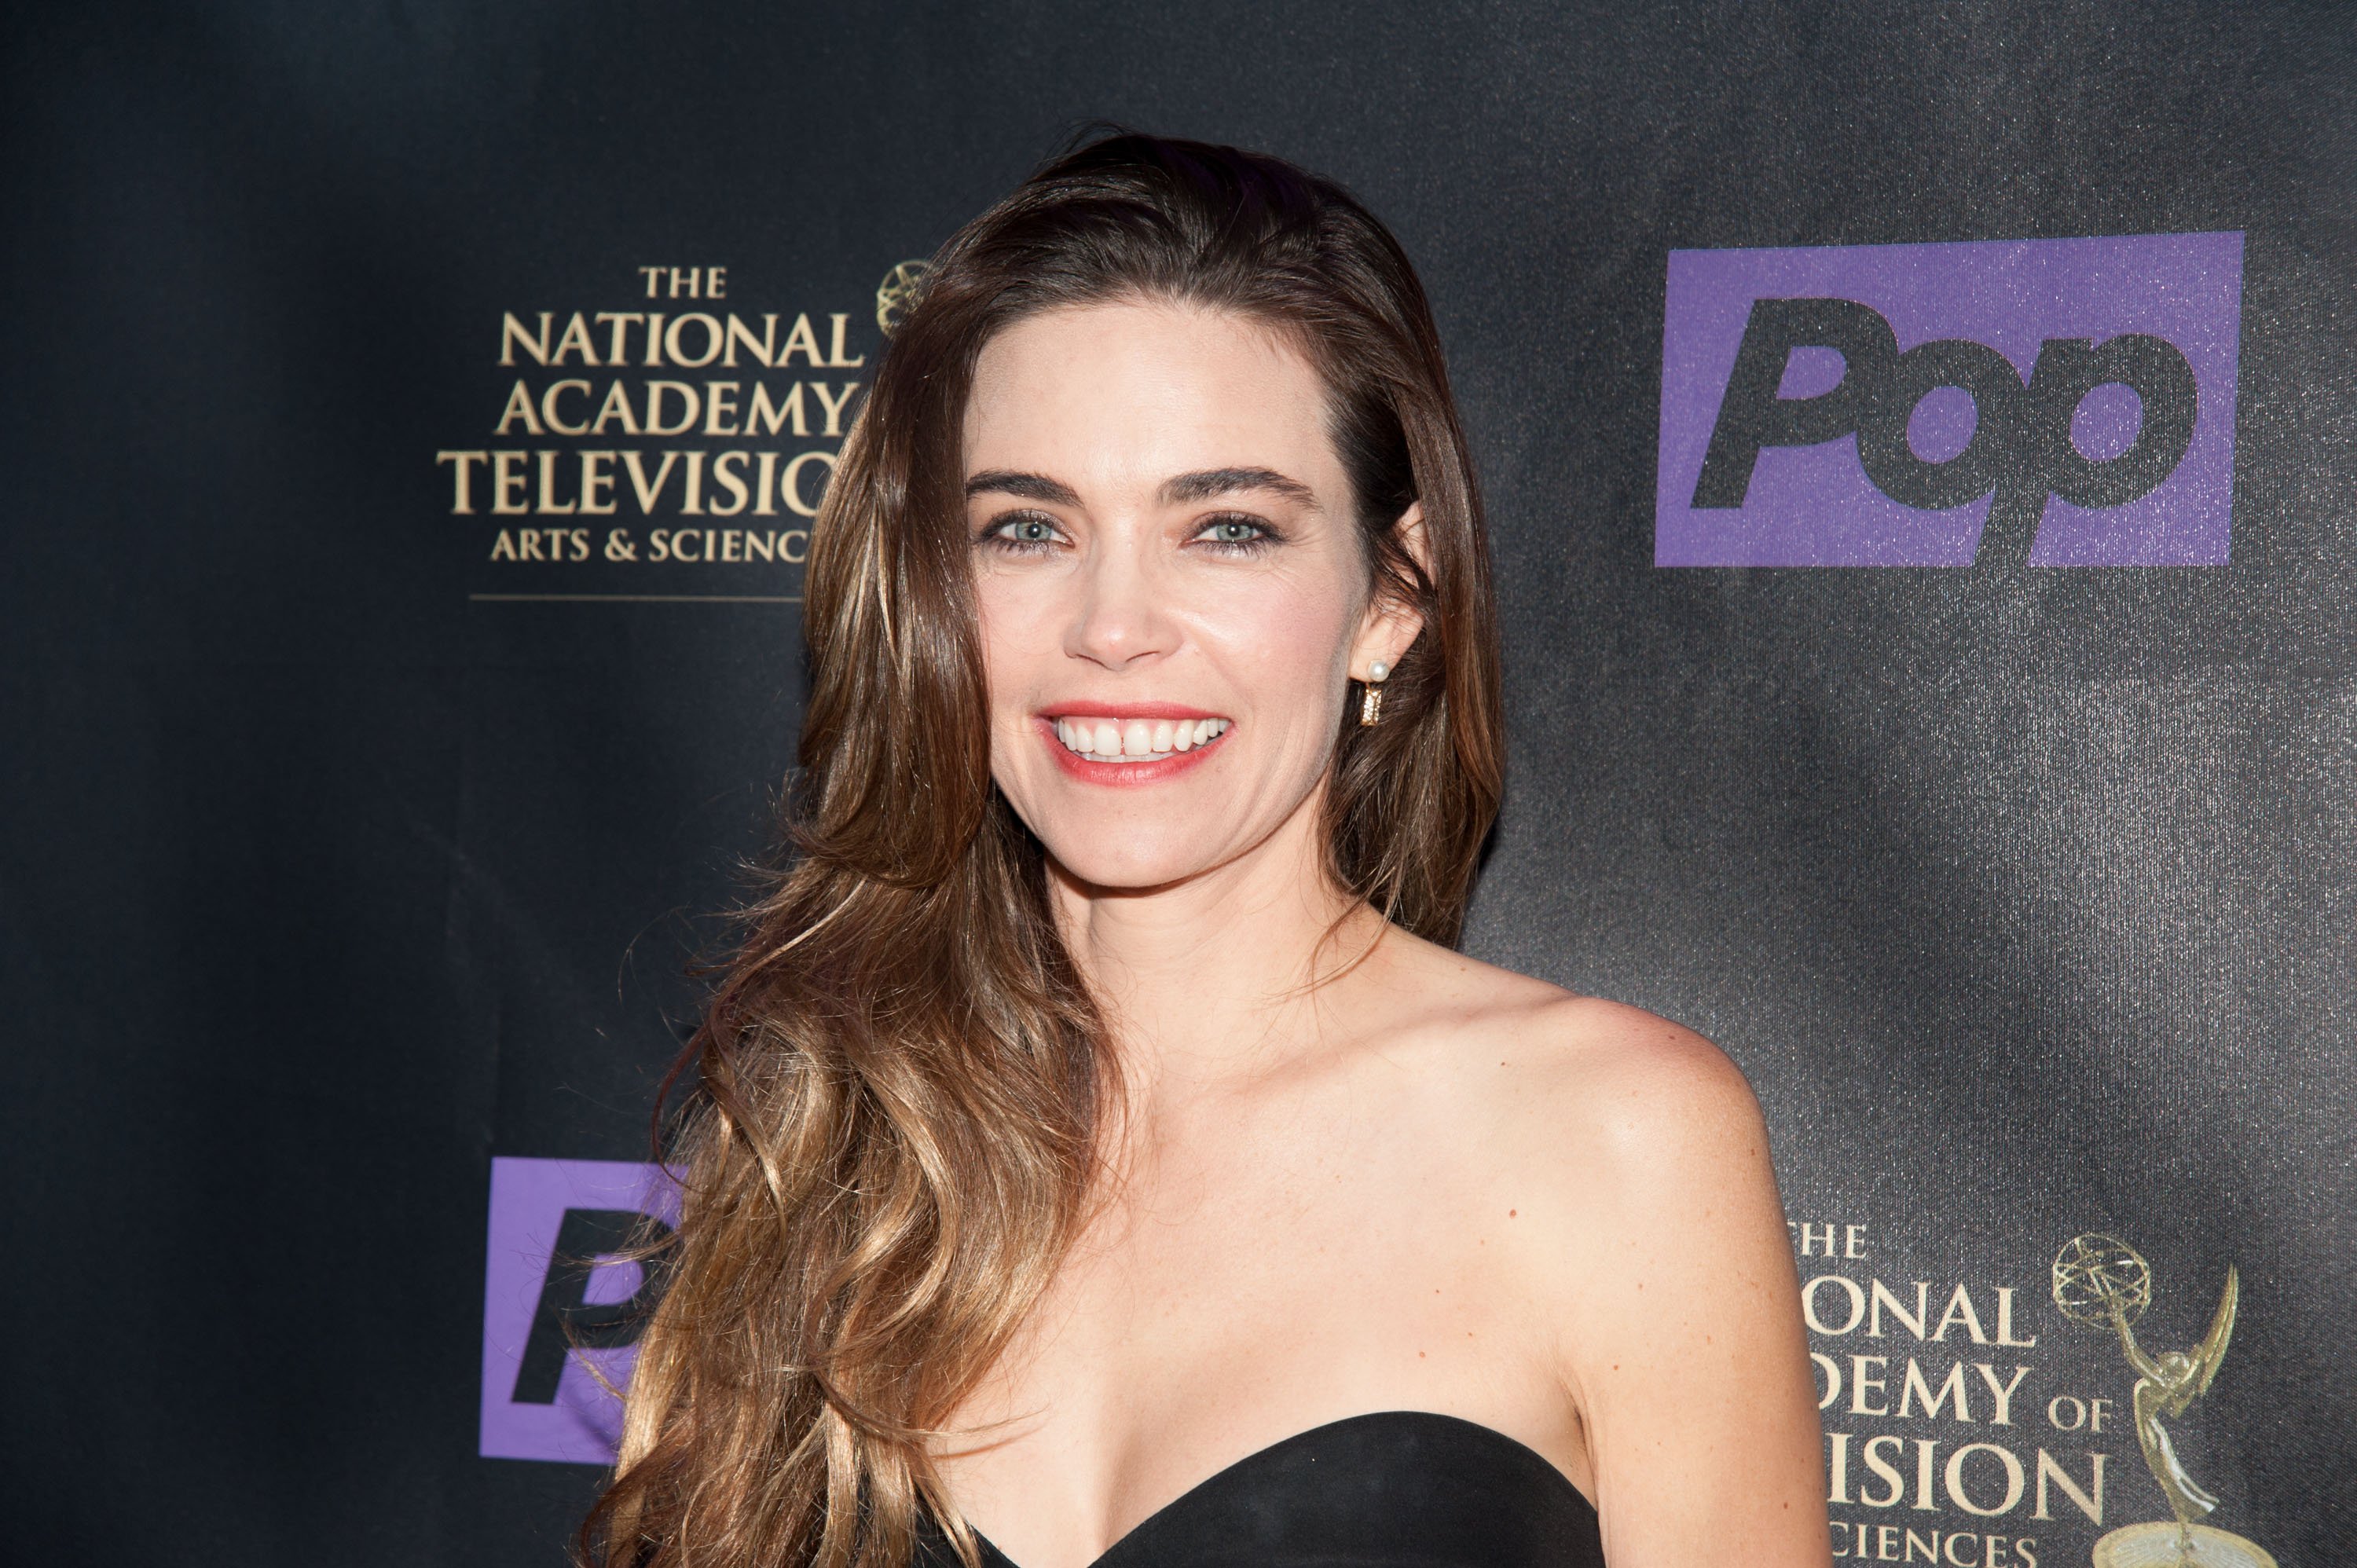 'The Young and the Restless' actor Amelia Heinle wearing a strapless black dress.